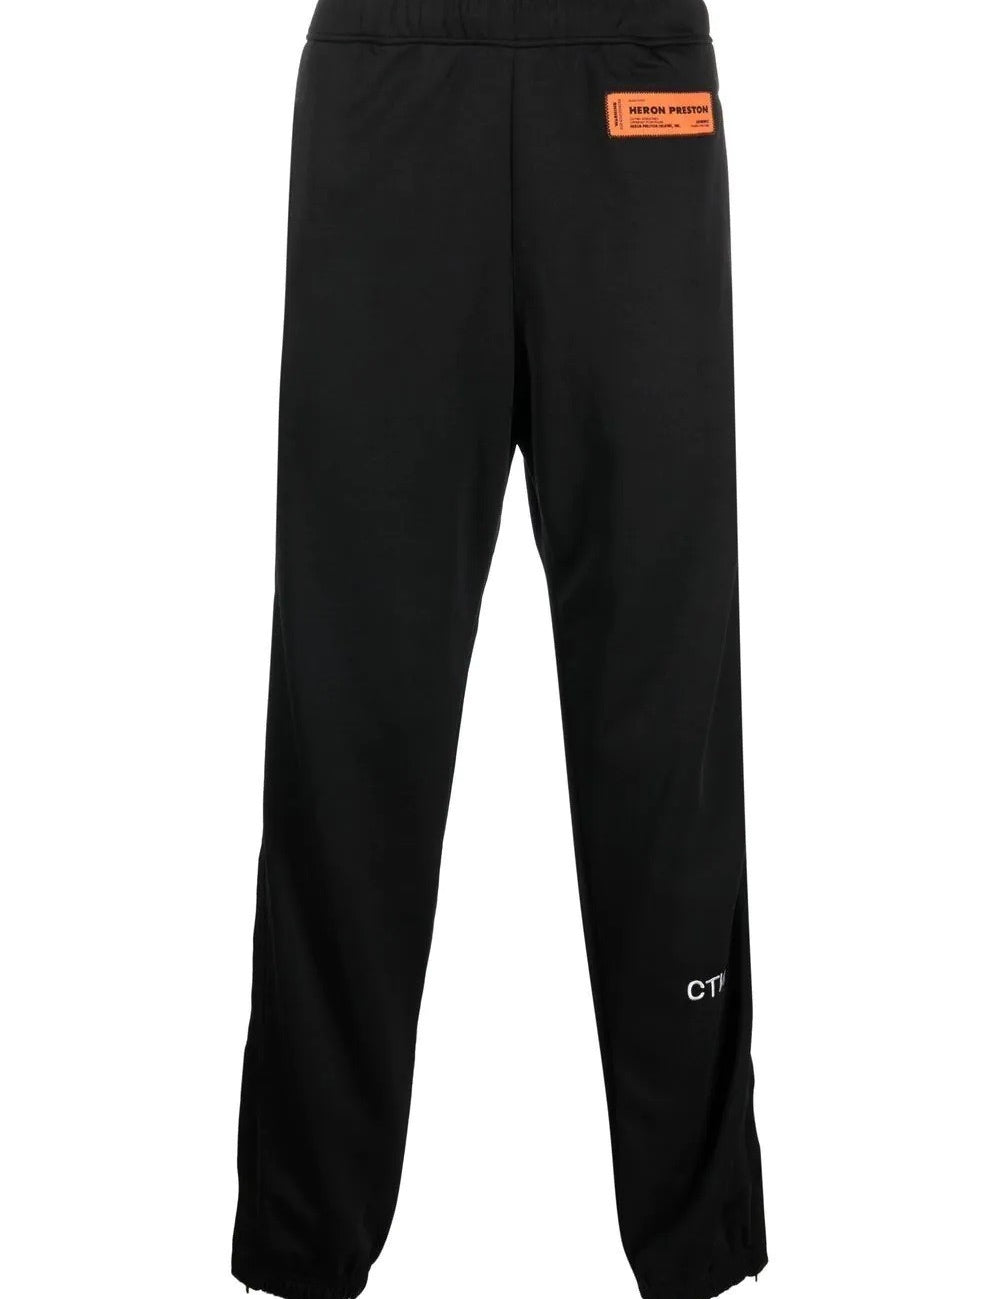 nf-trackpants-with-logo.jpg